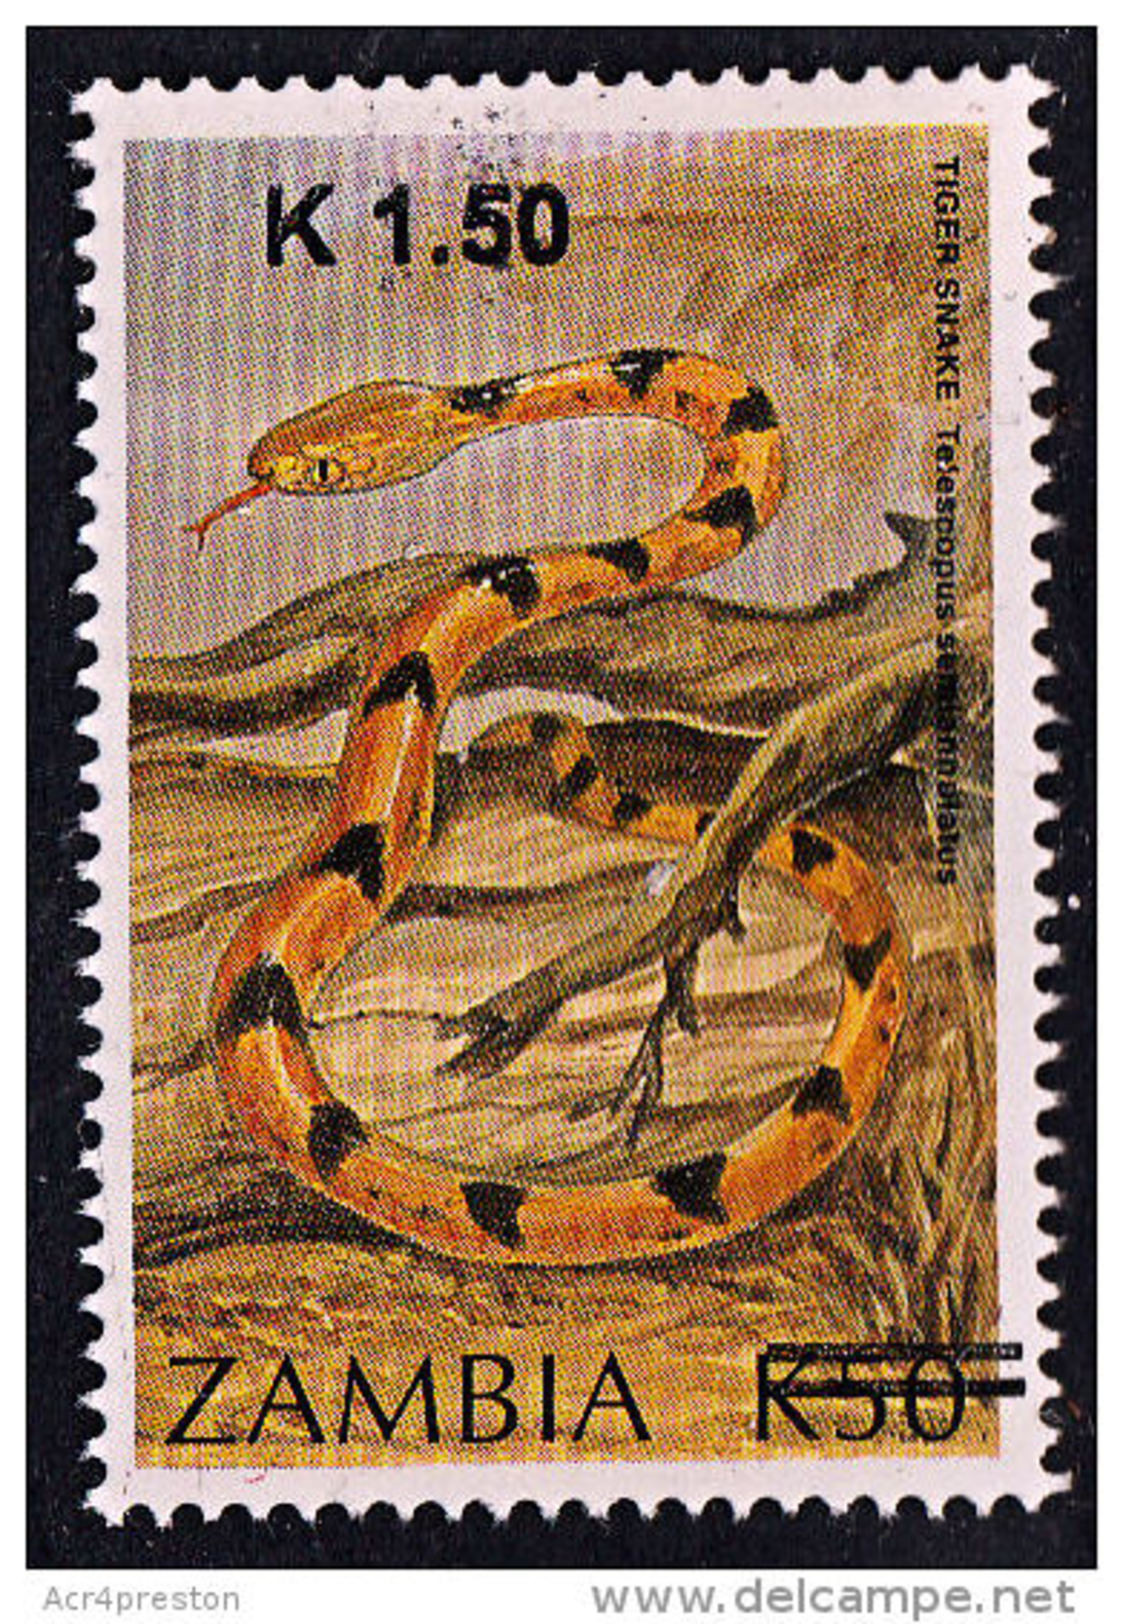 Zm1123 ZAMBIA 2014, NEW ISSUE K1.50 On K50 Tiger Snake  MNH (Issued 02-05-2014) - Zambie (1965-...)